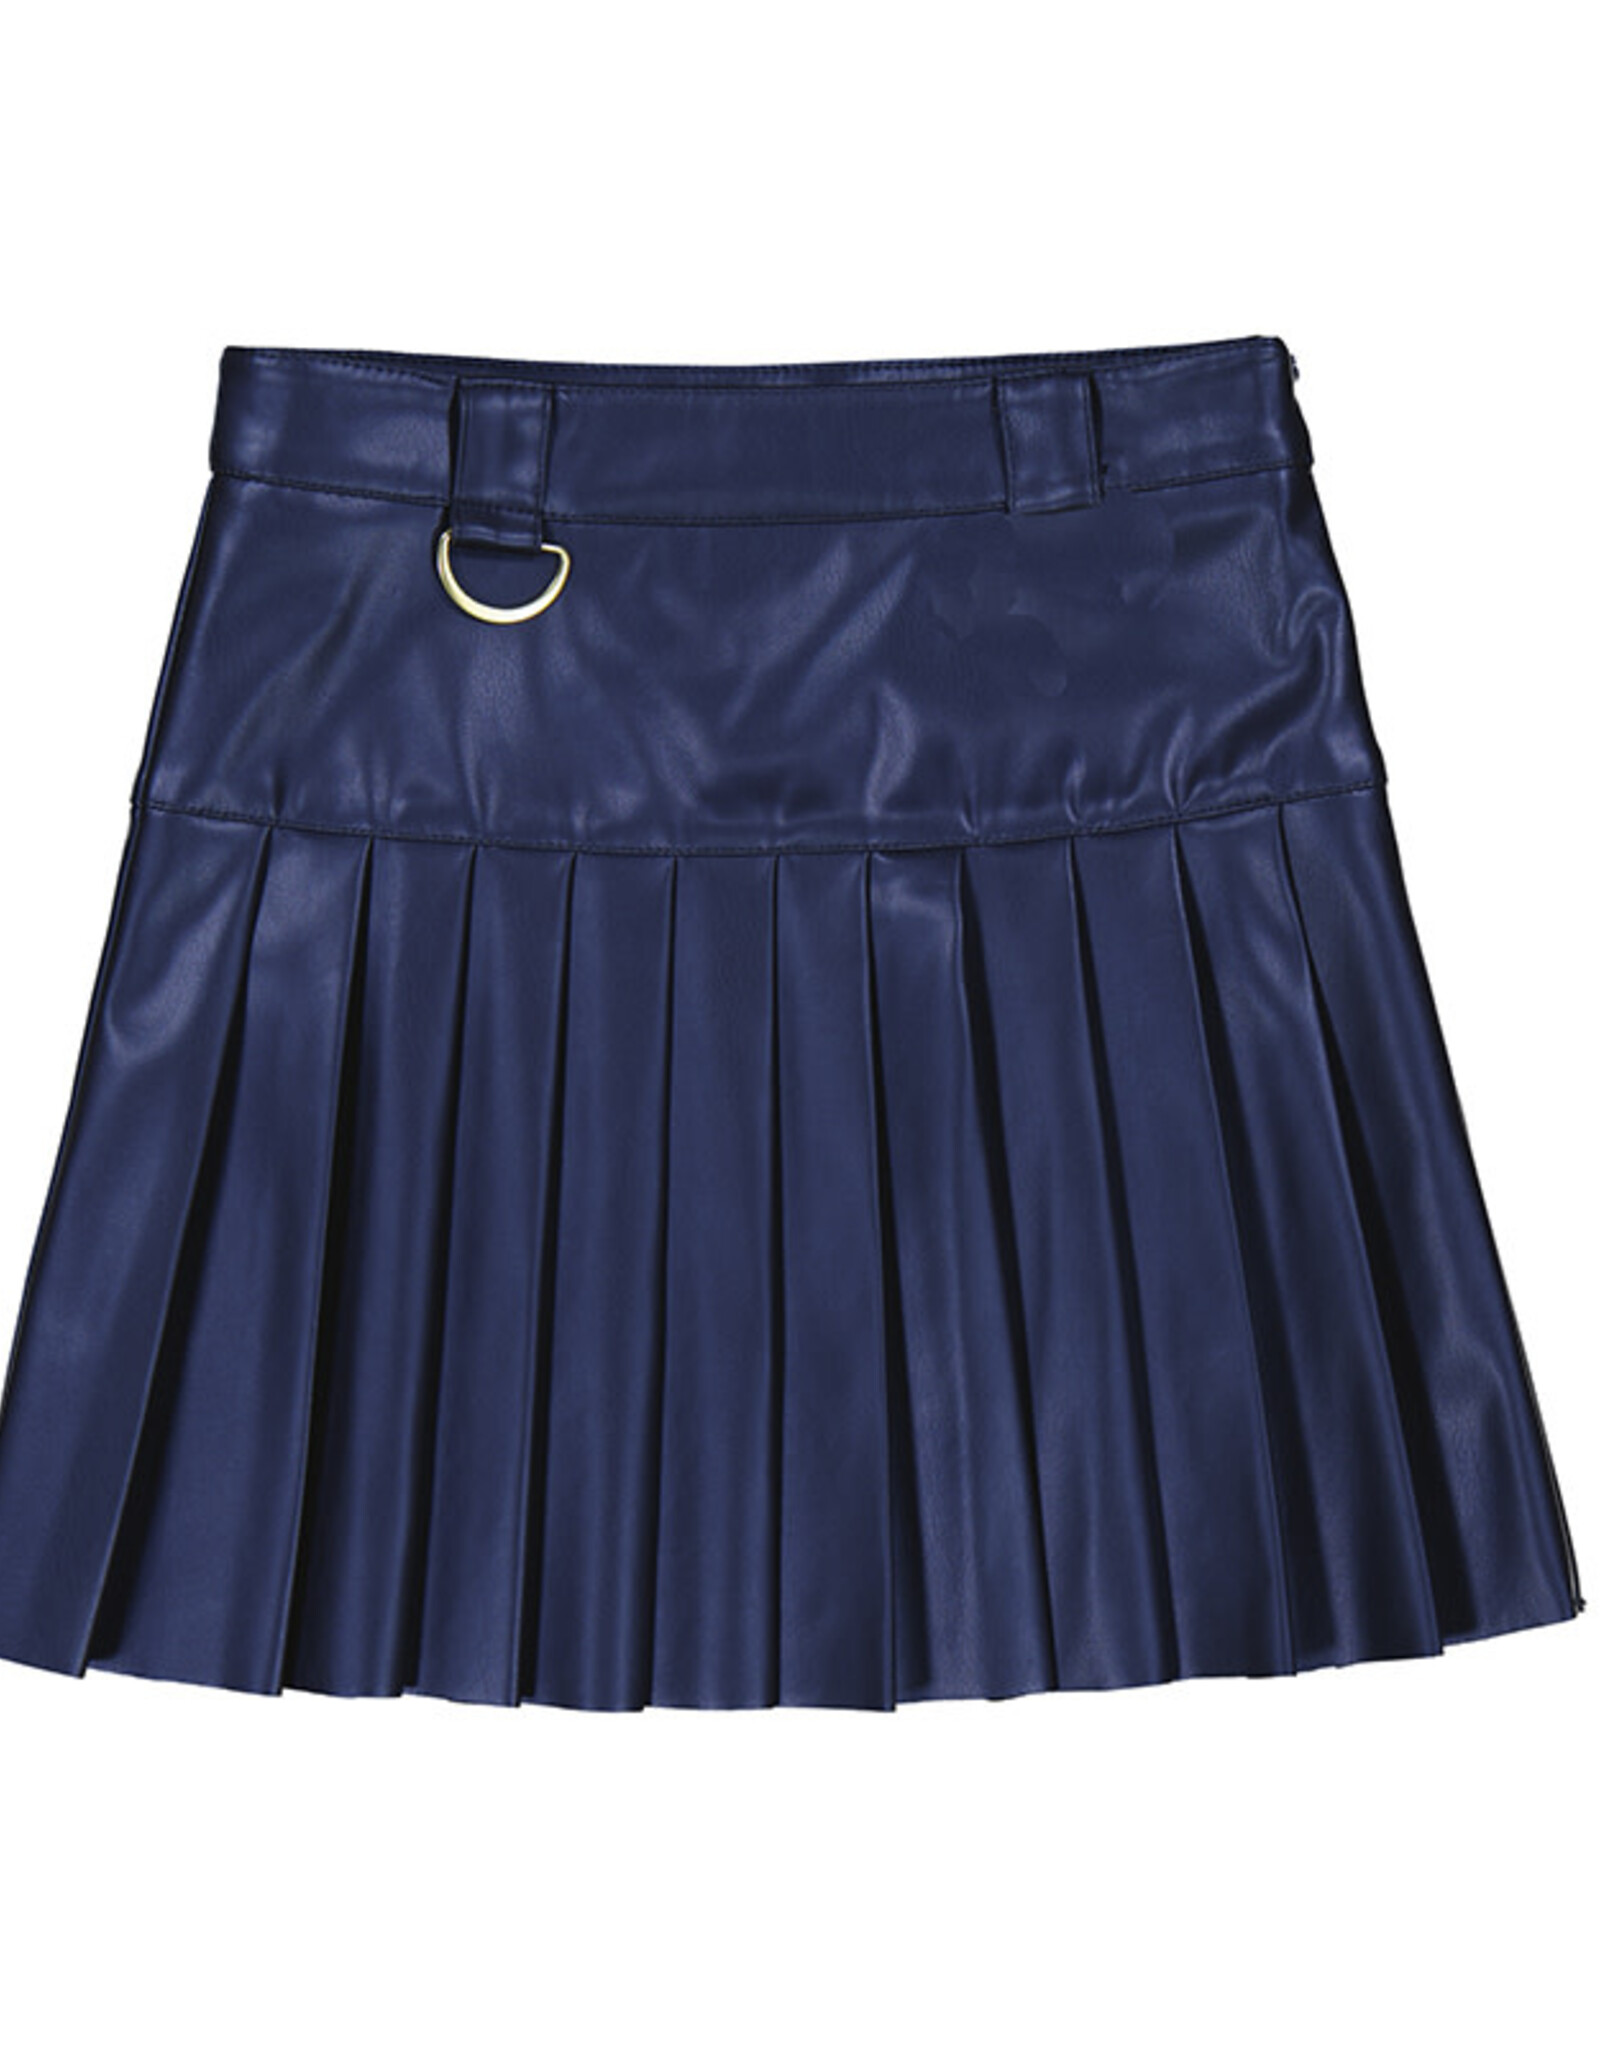 Mayoral Pleated Leather Skirt, Navy